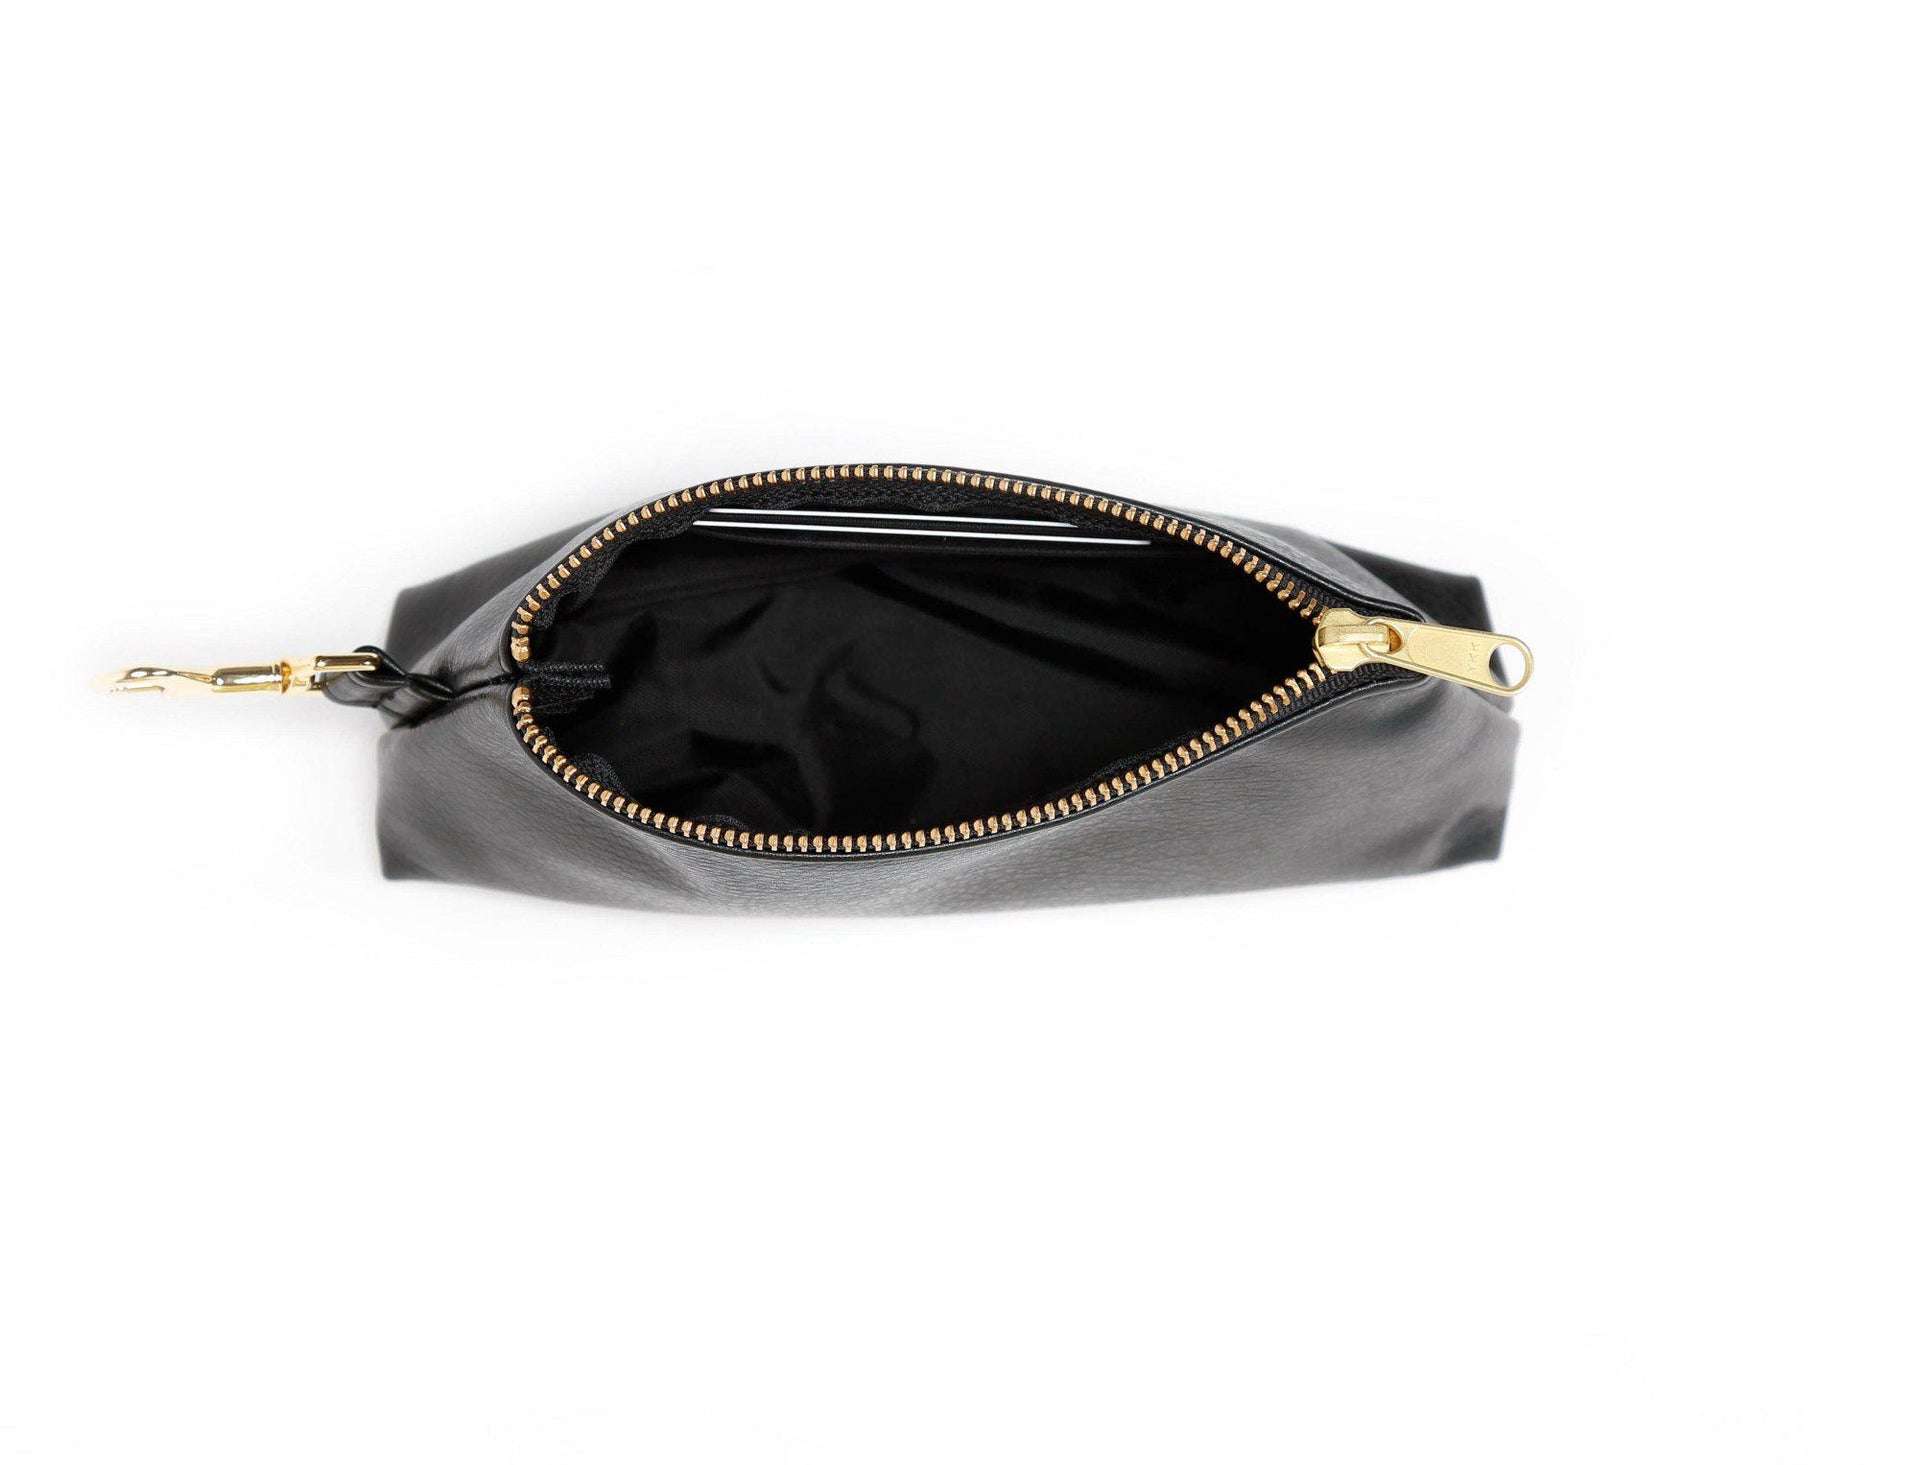 The Signature Bag, Your Clutch Purse Organizer Solution in Vegan, Leather-Like Style and Comfort Luxe with Silver Hardware